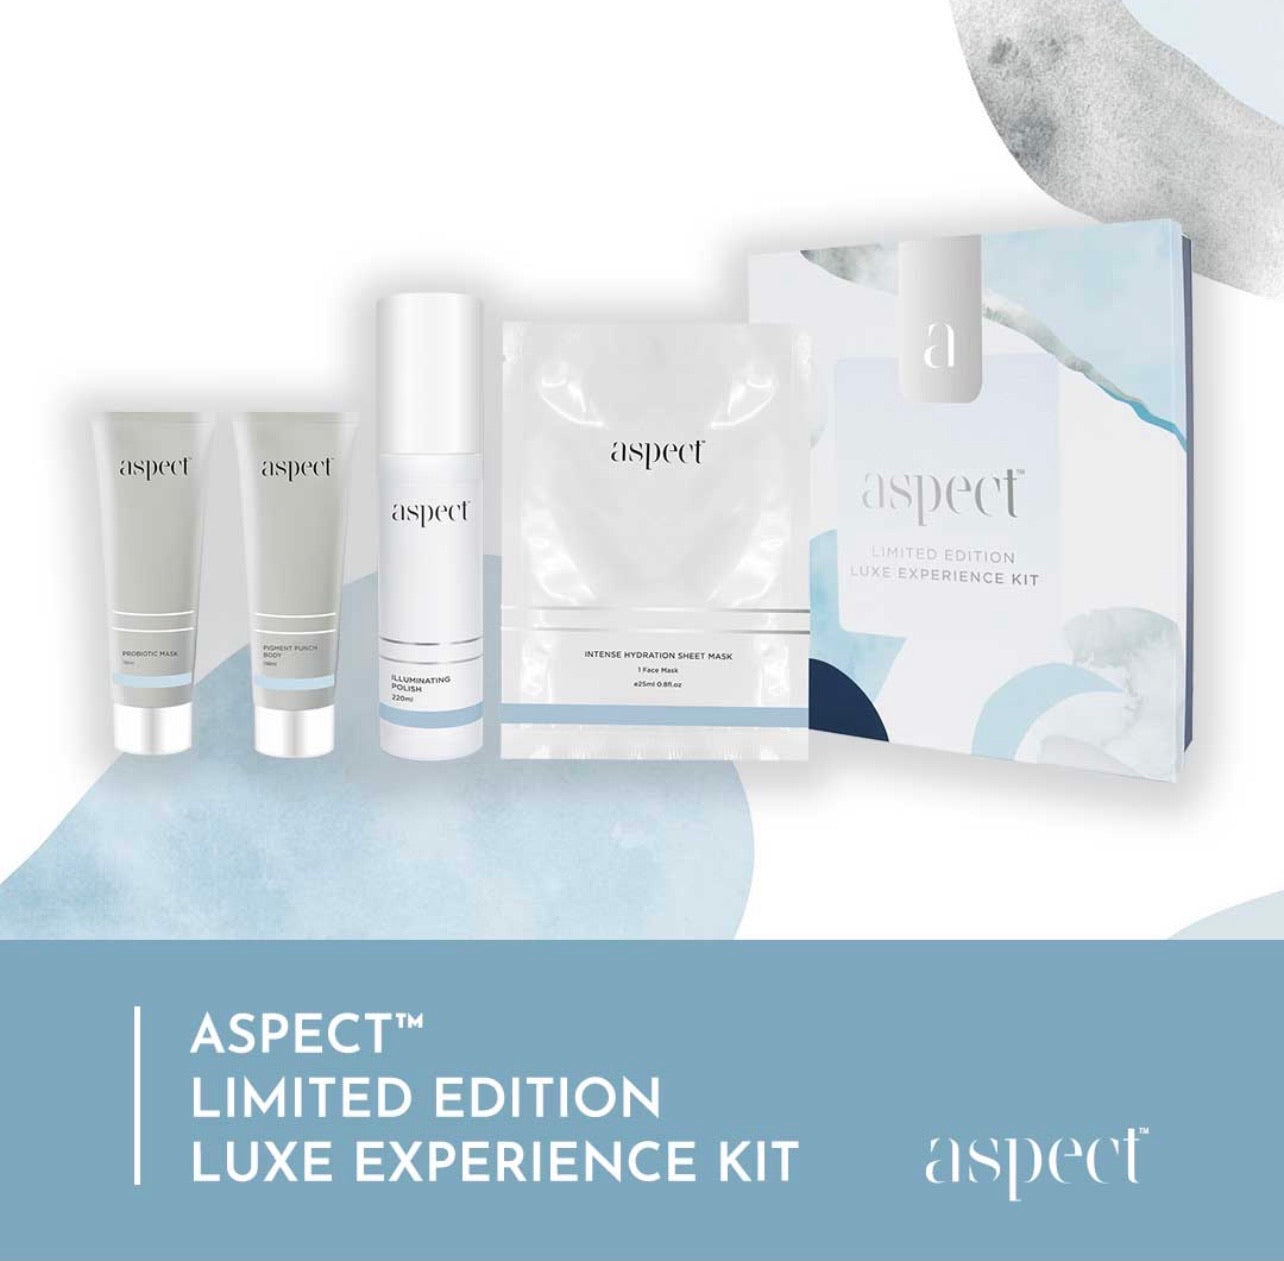 Aspect Limited Edition Luxe Experience Kit